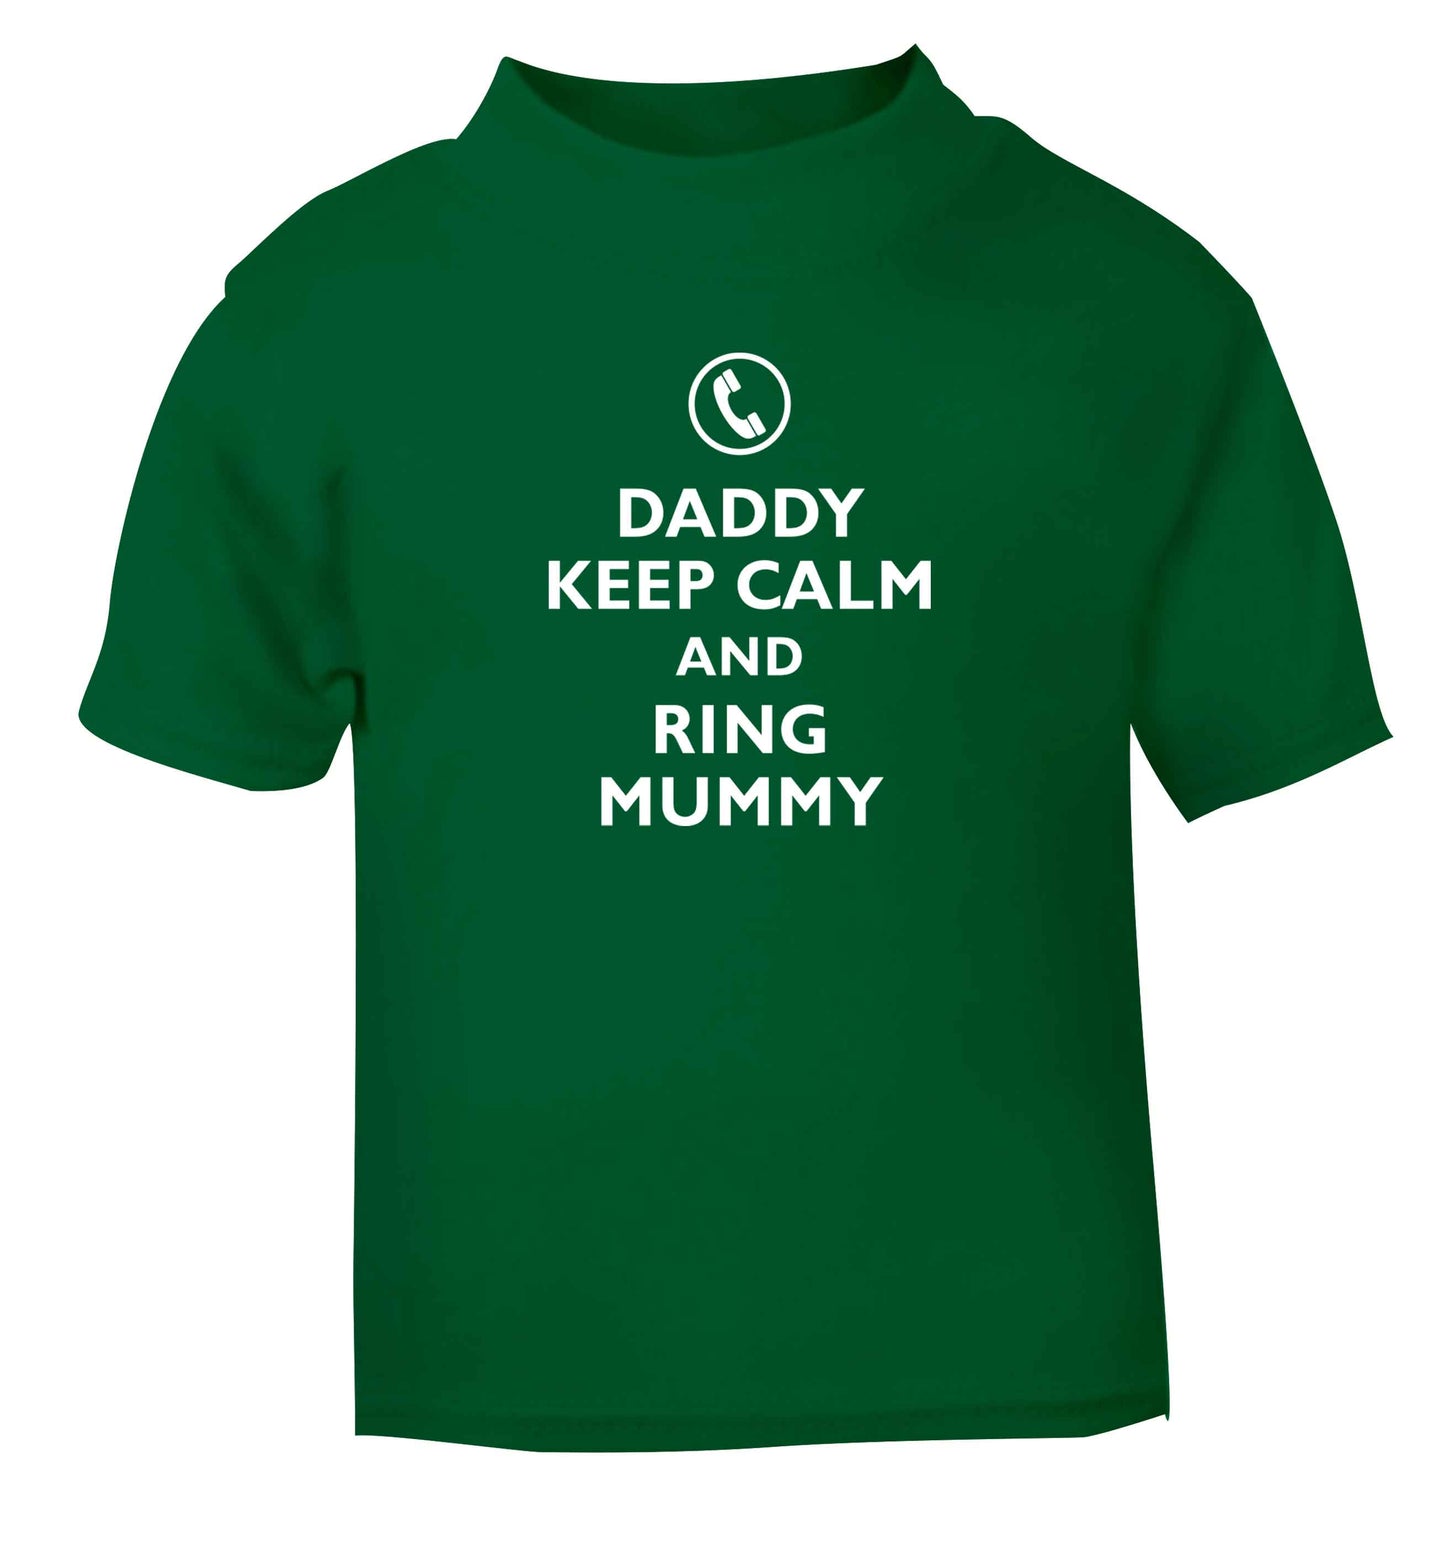 Daddy keep calm and ring mummy green baby toddler Tshirt 2 Years